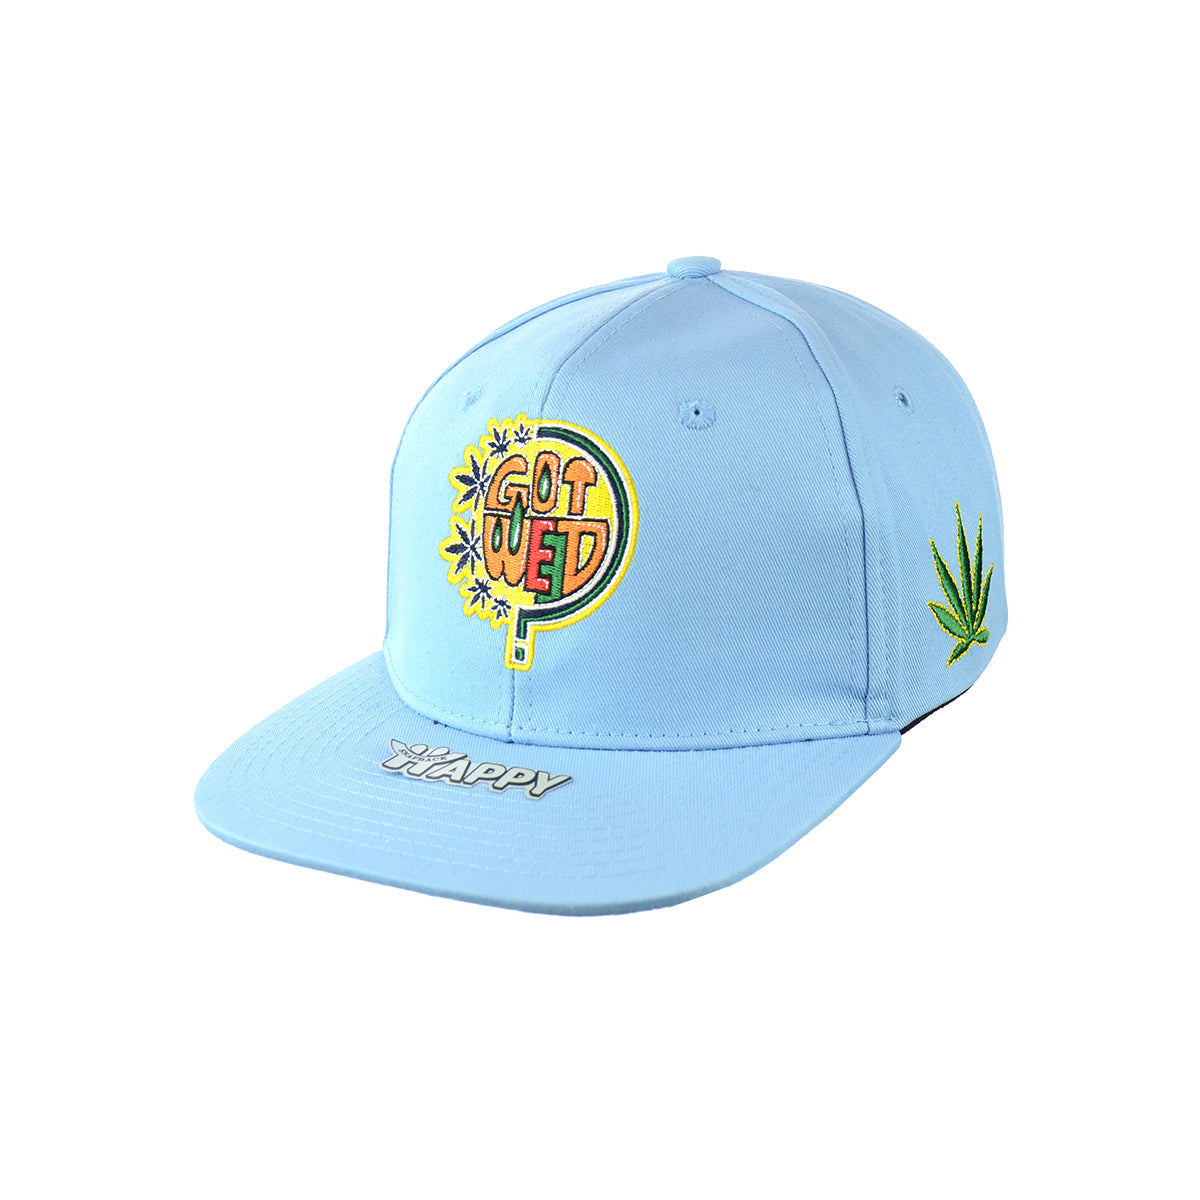 Got Weed? Hat Embroidered Snapback - 100% Cotton